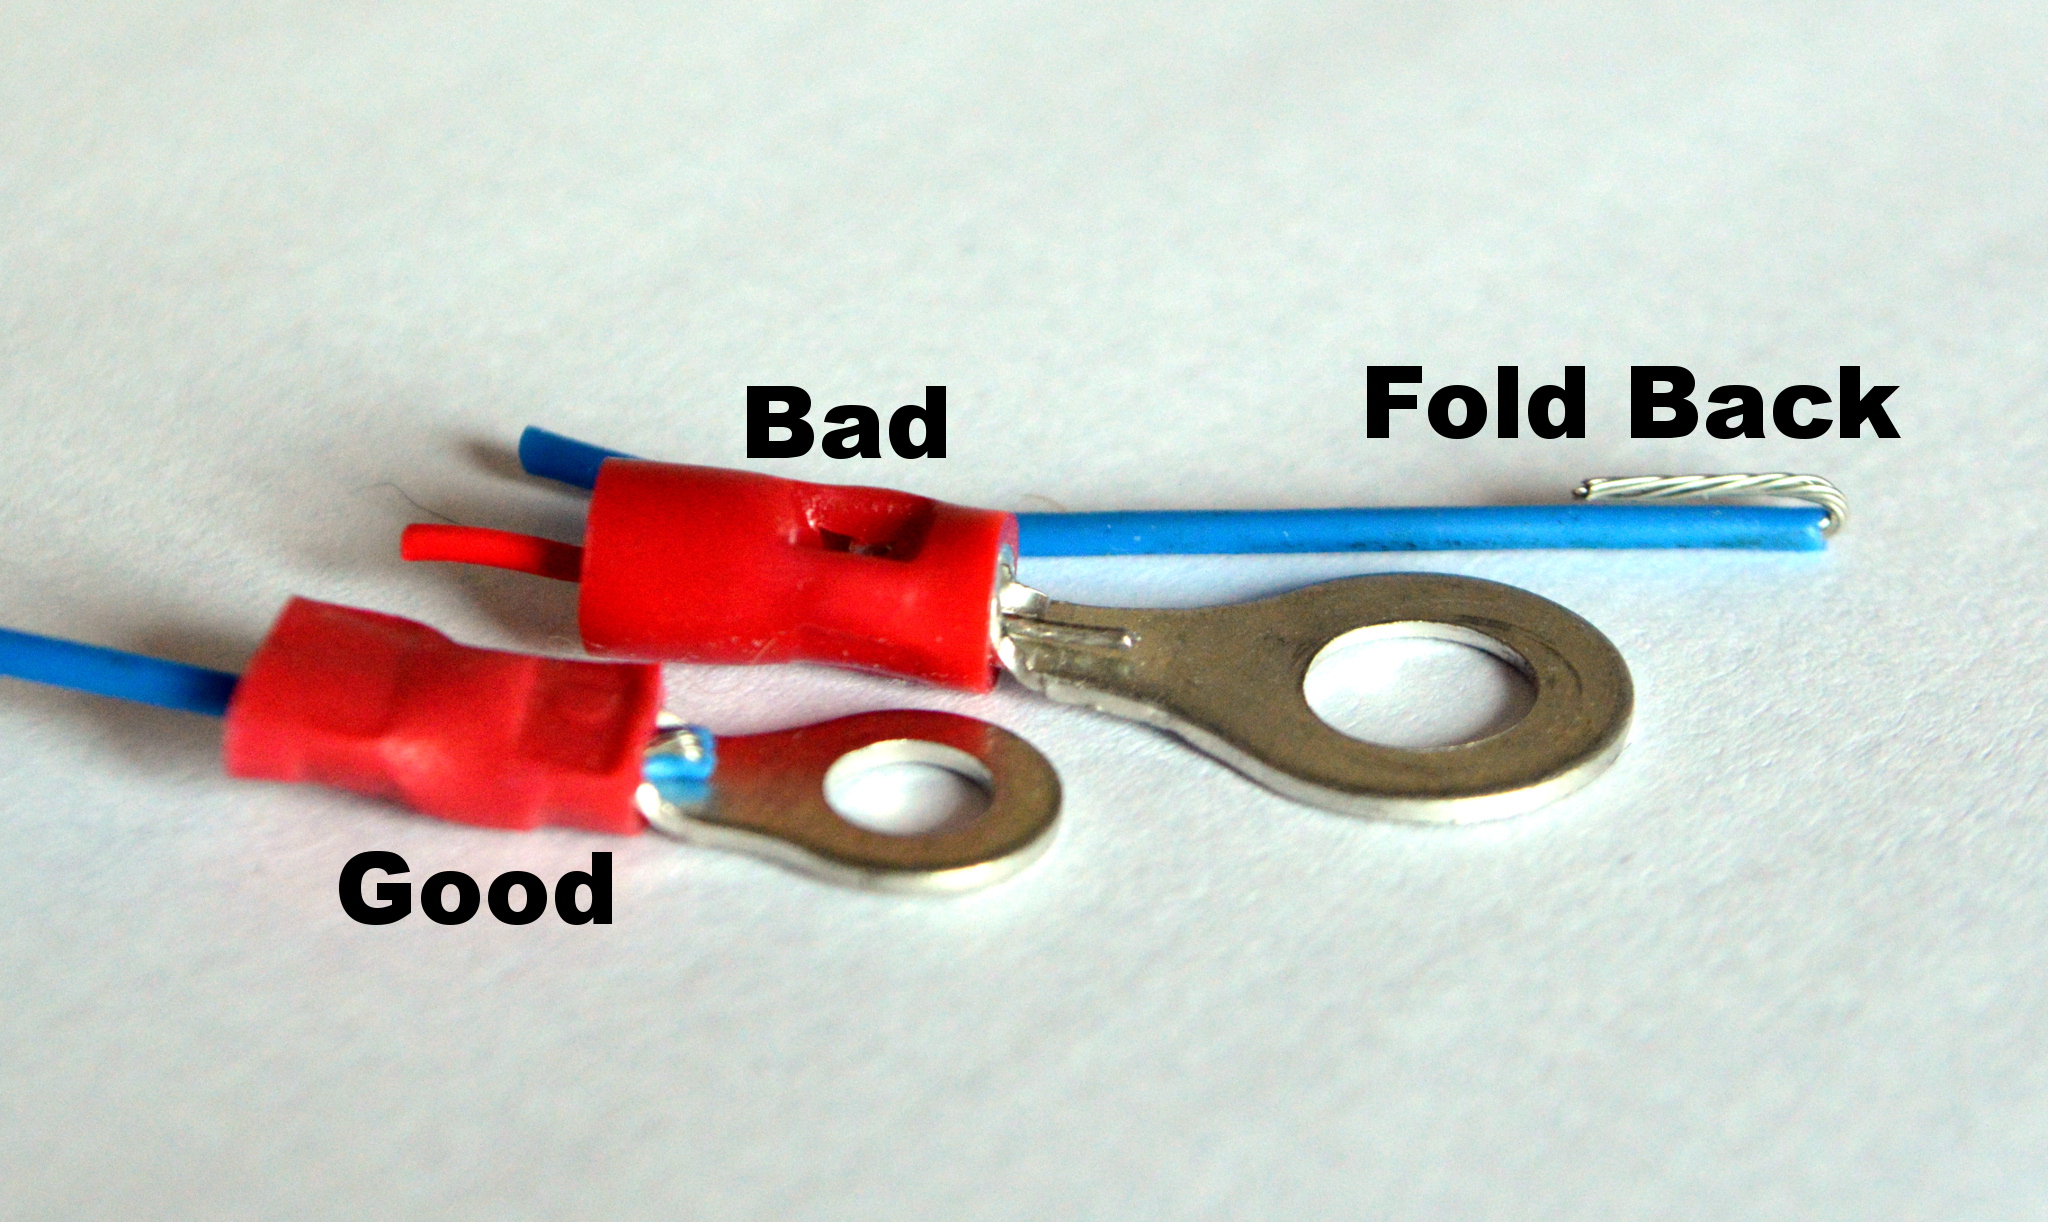 Basic Guide to Terminal Crimping 2. How to Crimp a Terminal